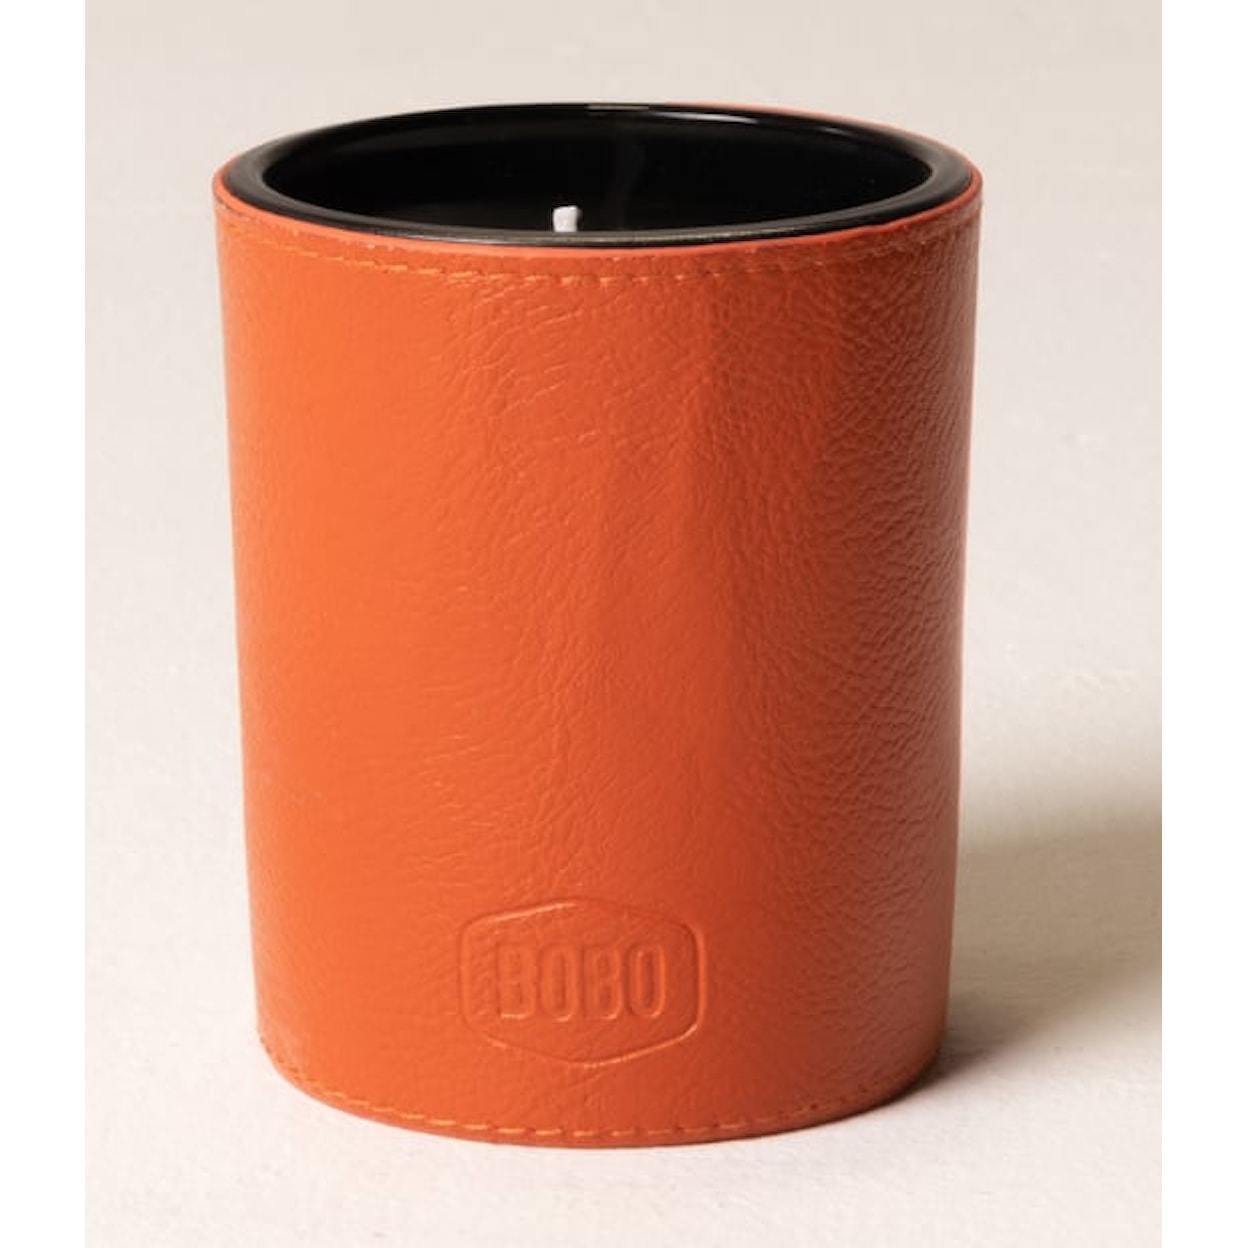 BOBO Intriguing Objects Accessory Fleur Oranger (Orange) Candle